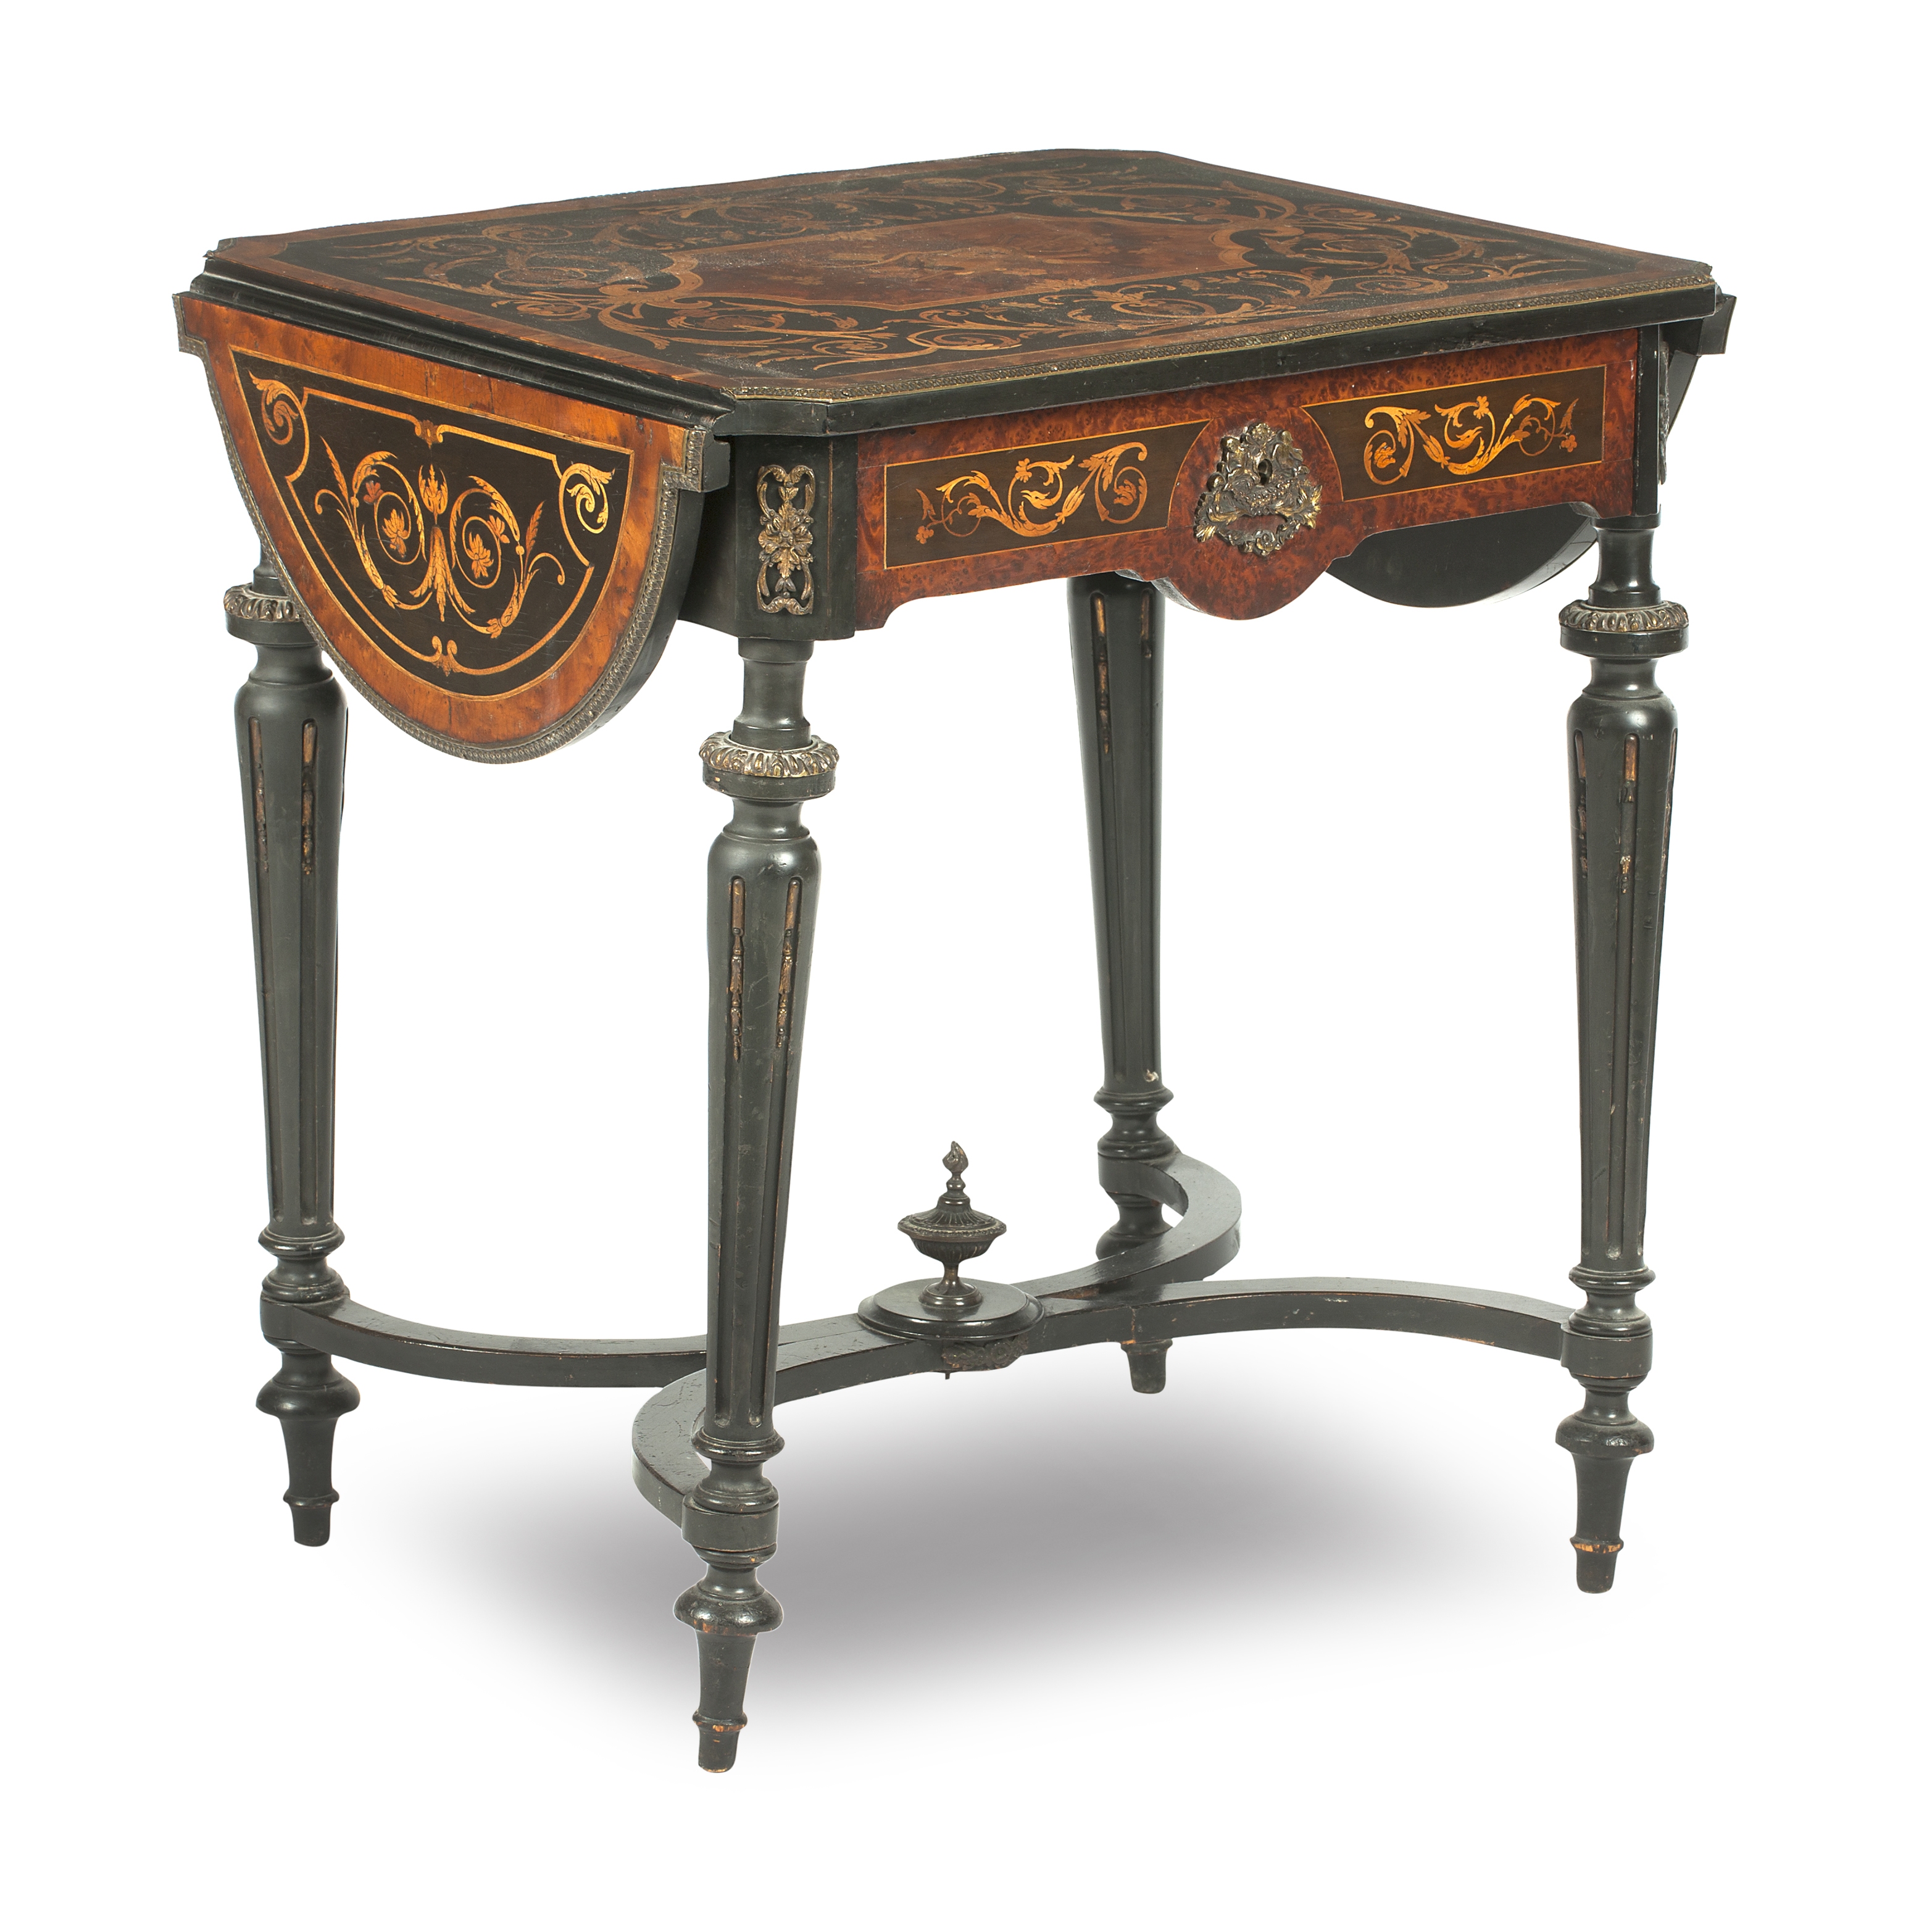 A late 19th/early 20th century French walnut, marquetry inlaid and gilt metal mounted writing table